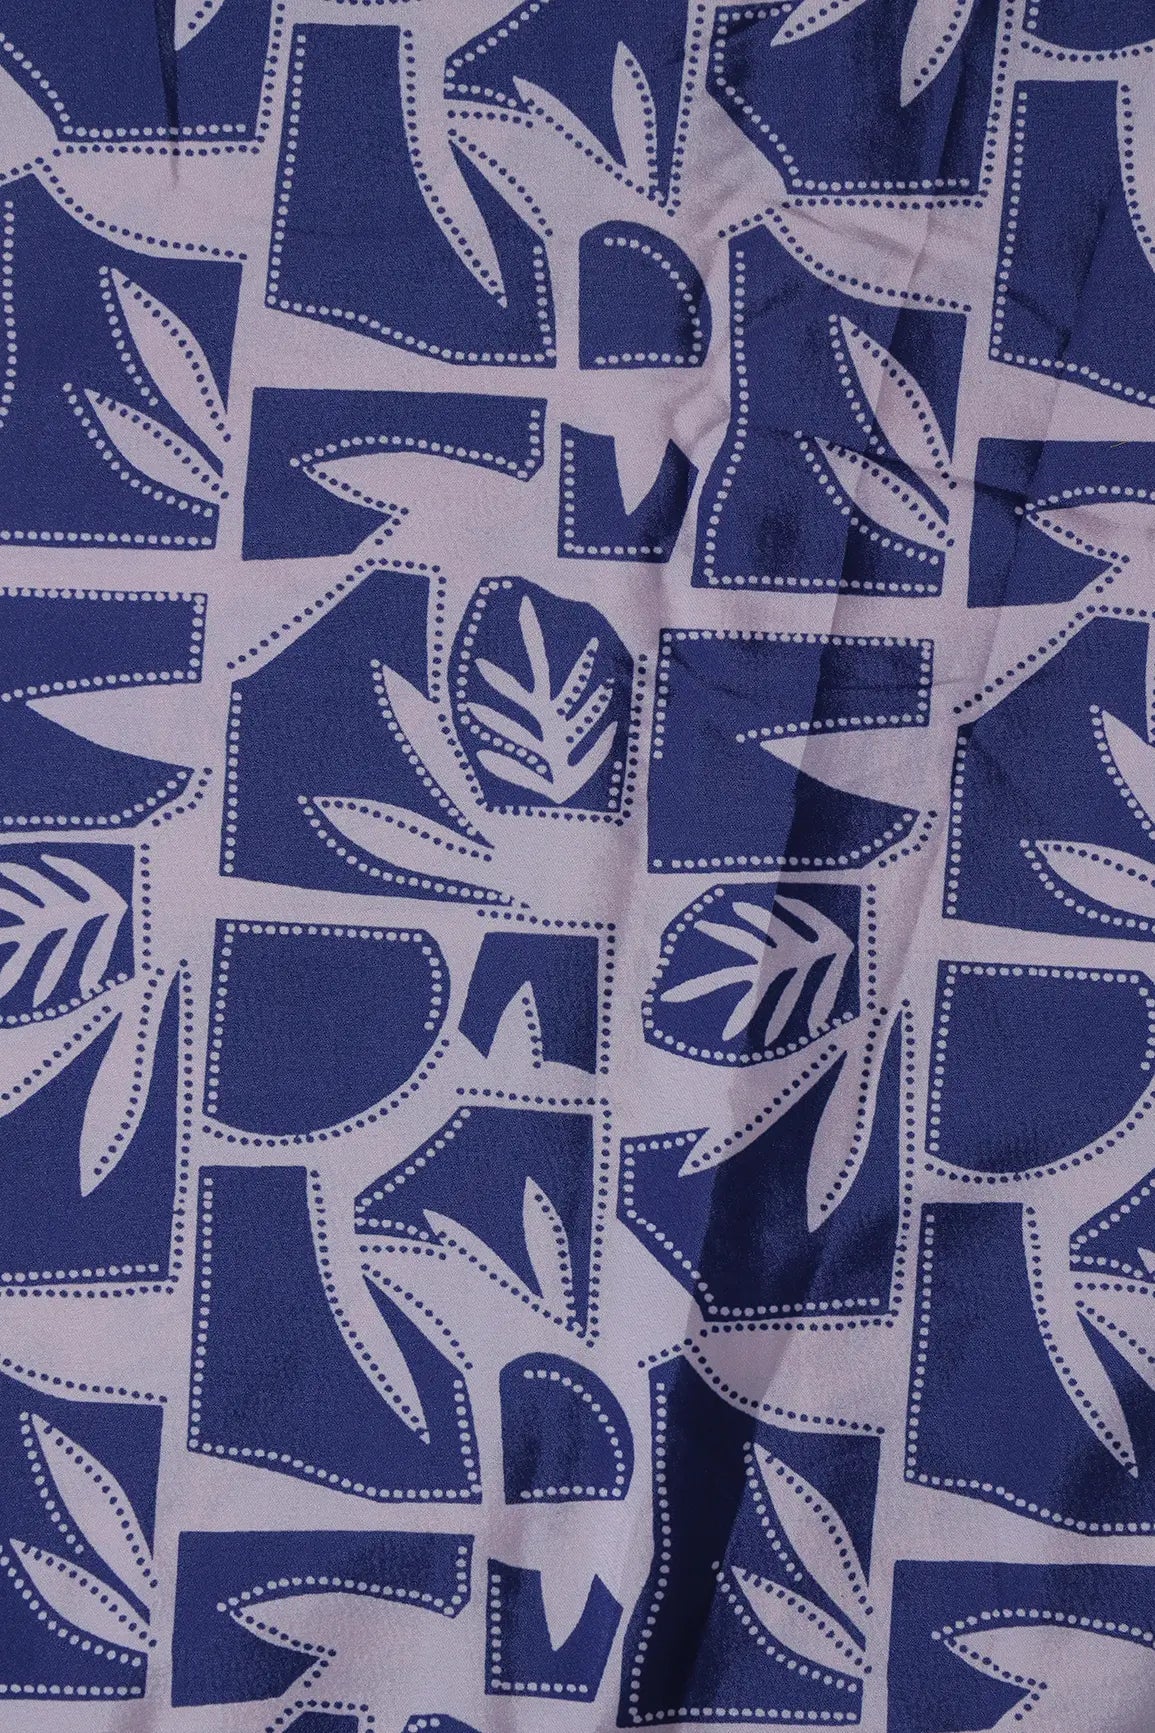 Navy Blue And White Geometric Pattern Digital Print On French Crepe Fabric - doeraa